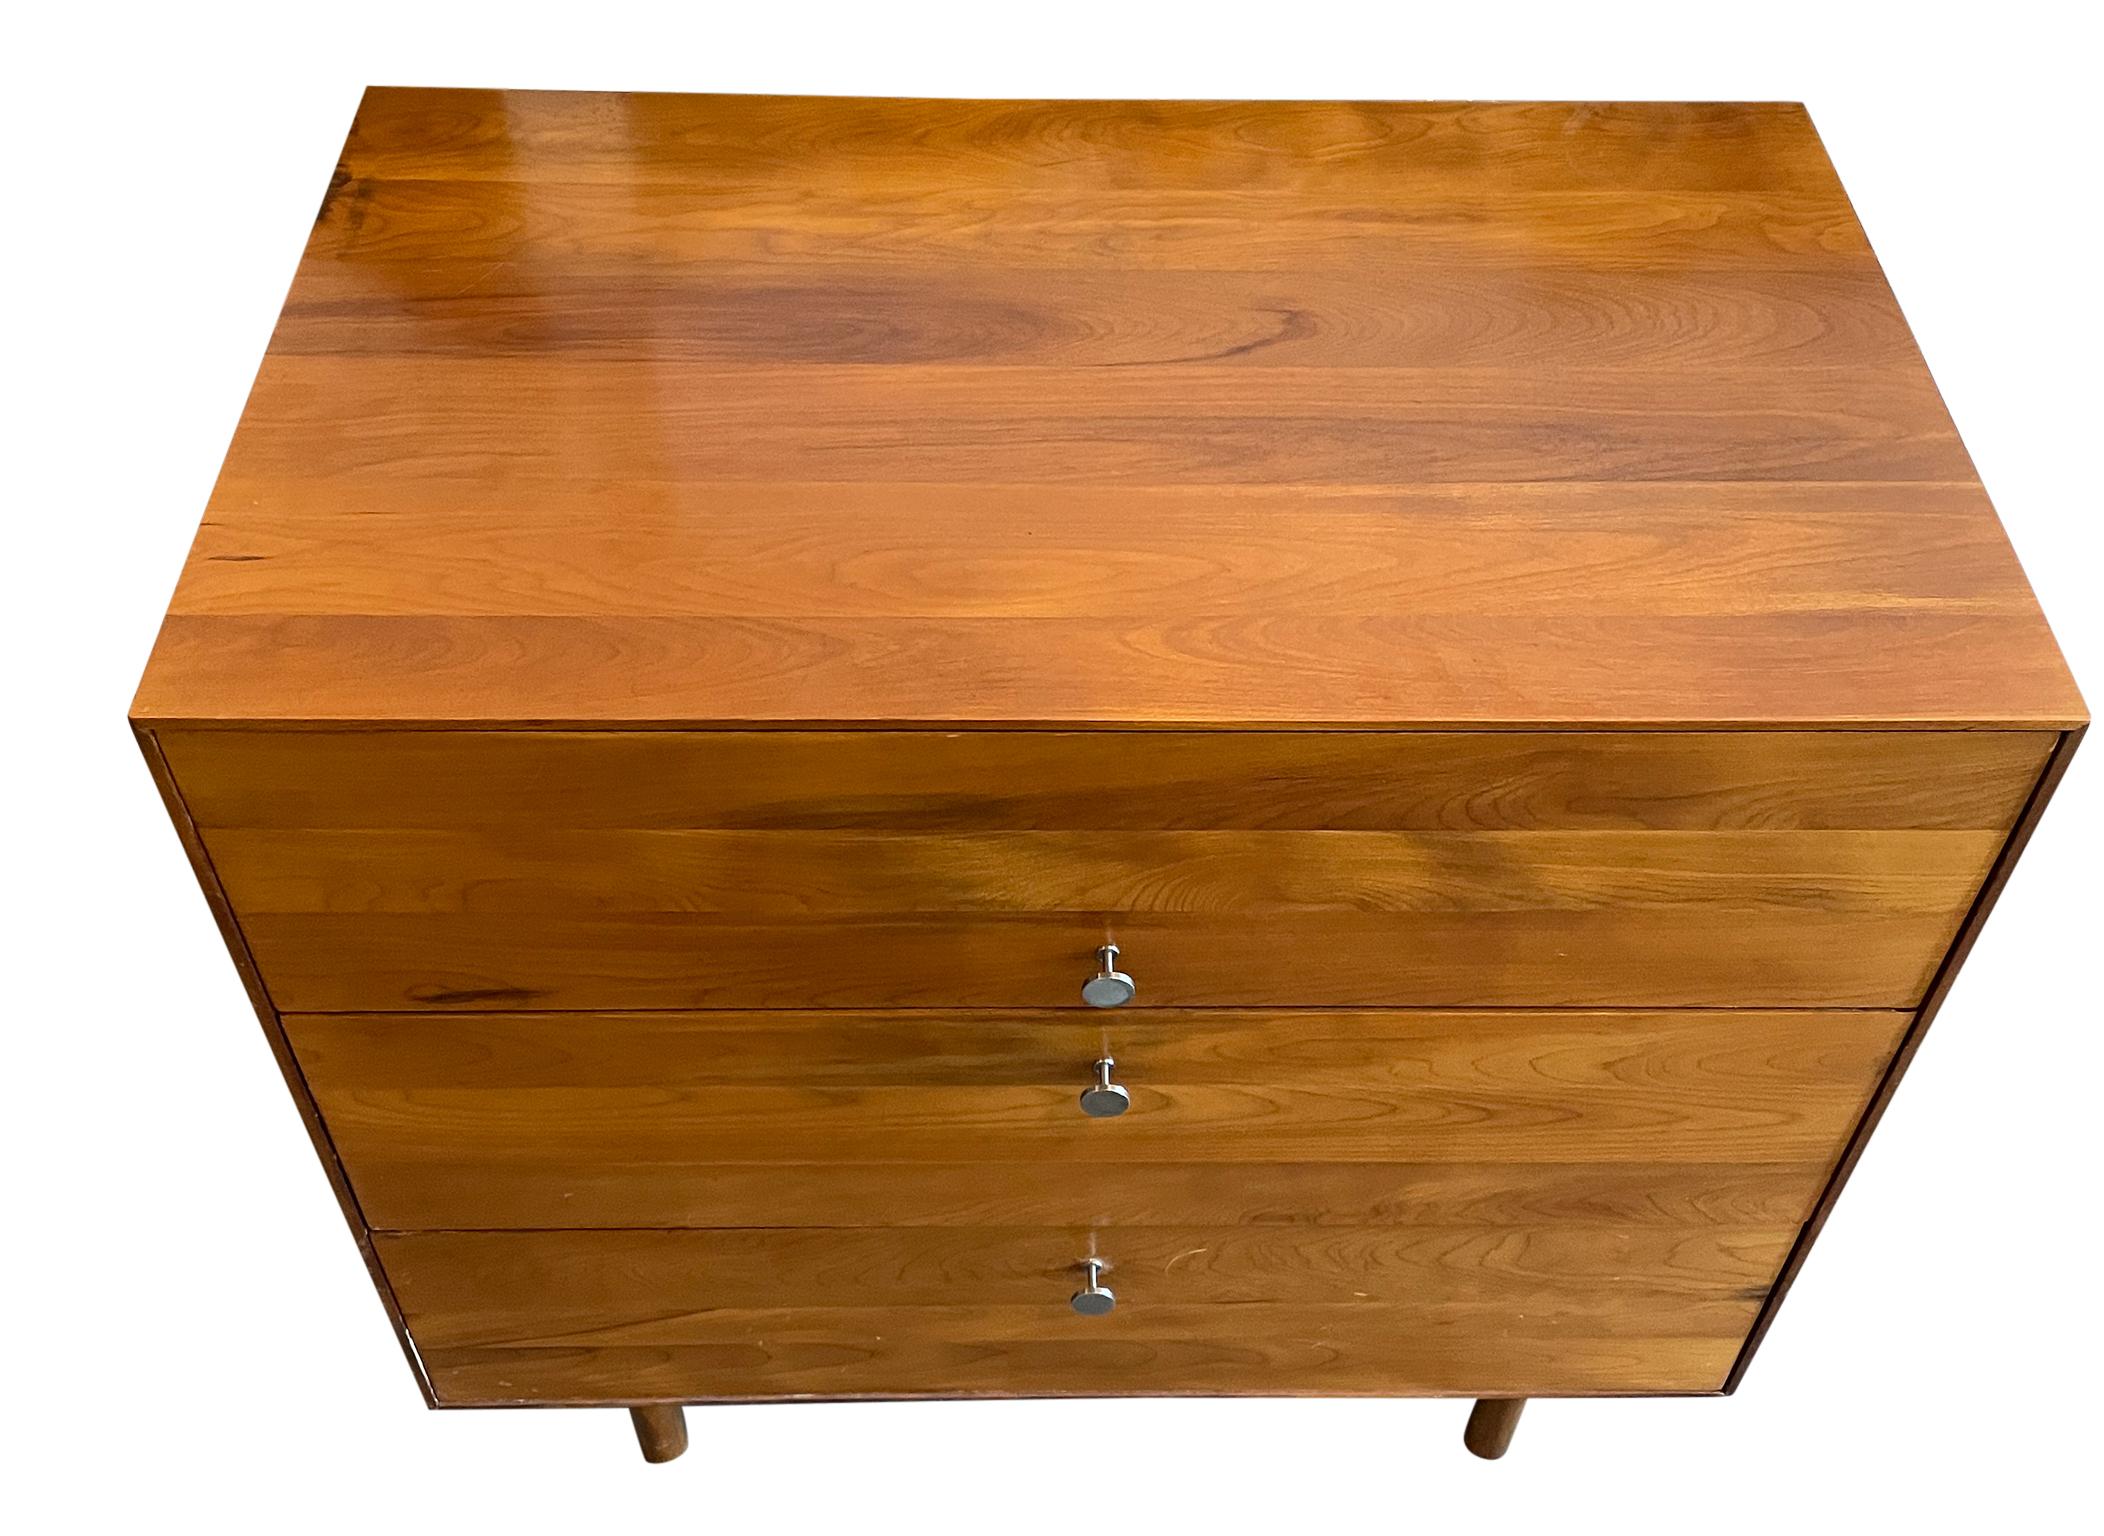 Beautiful Whitney American made Mid-Century Modern solid birch 3 drawer dresser nickel pulls and sliding jewelry tray. Blonde birch finish with lower aluminum stretcher with round wooden legs. Great construction and design. clean inside and out.